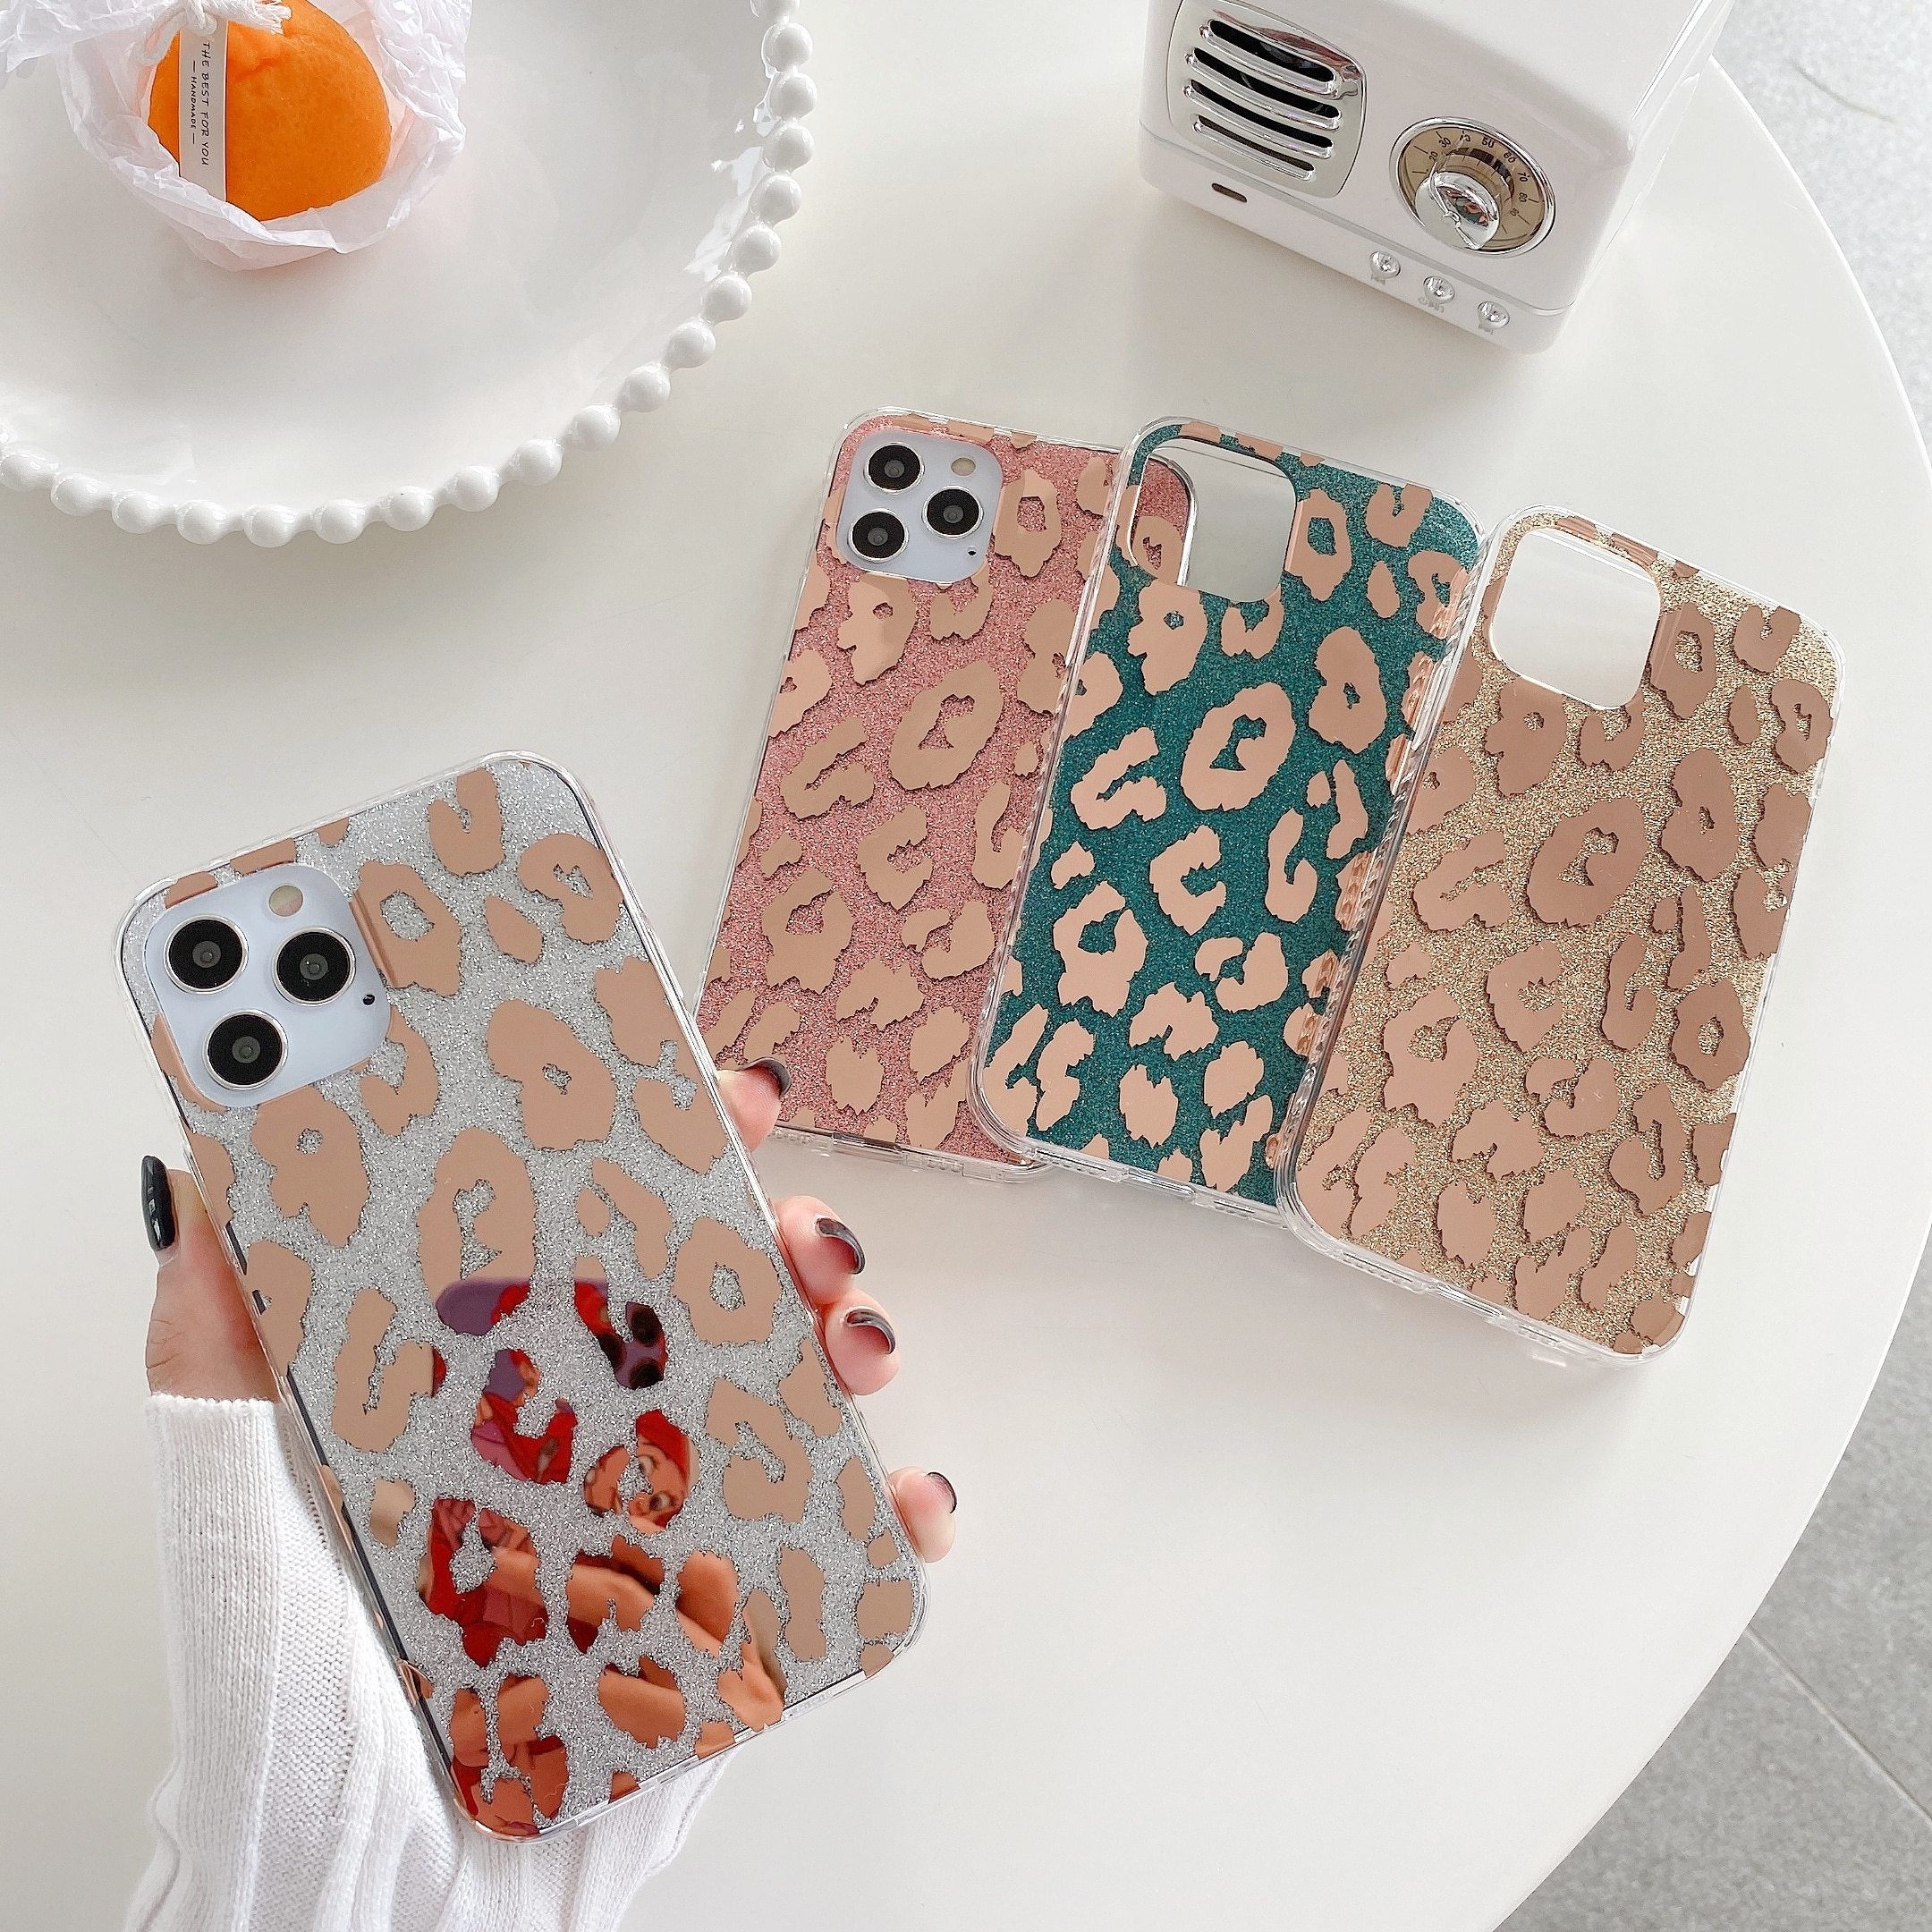 Case Luxury Leopard Soft Shockproof Back Cover For iPhone